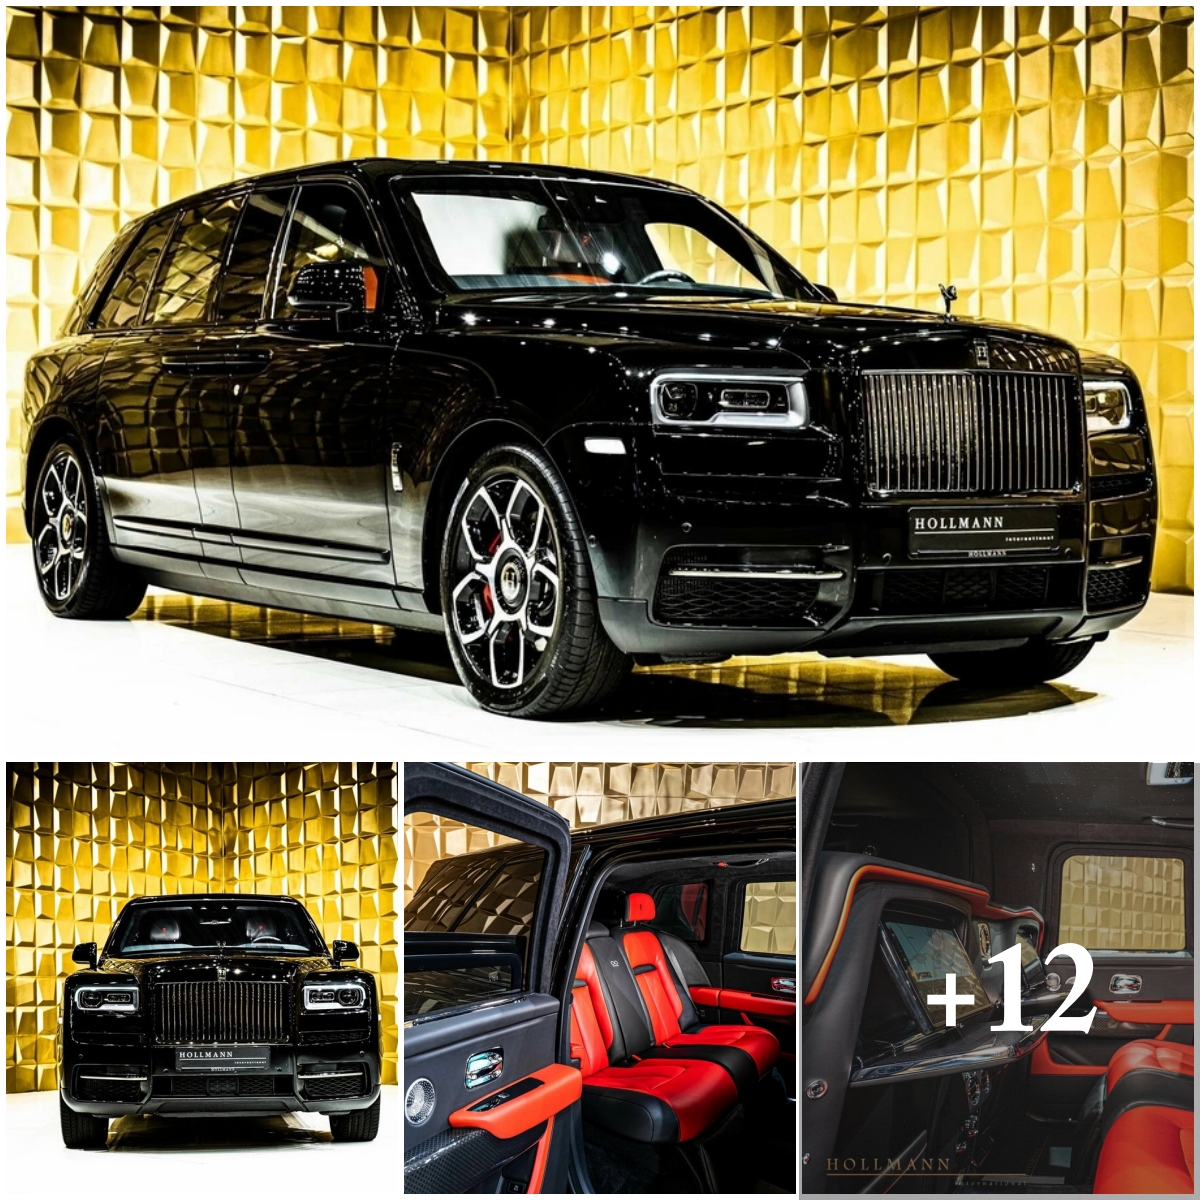 Exceptional Rolls-Royce Cullinan: Fourfold Price, Extended Length, Bulletproofing, and Explosive Features